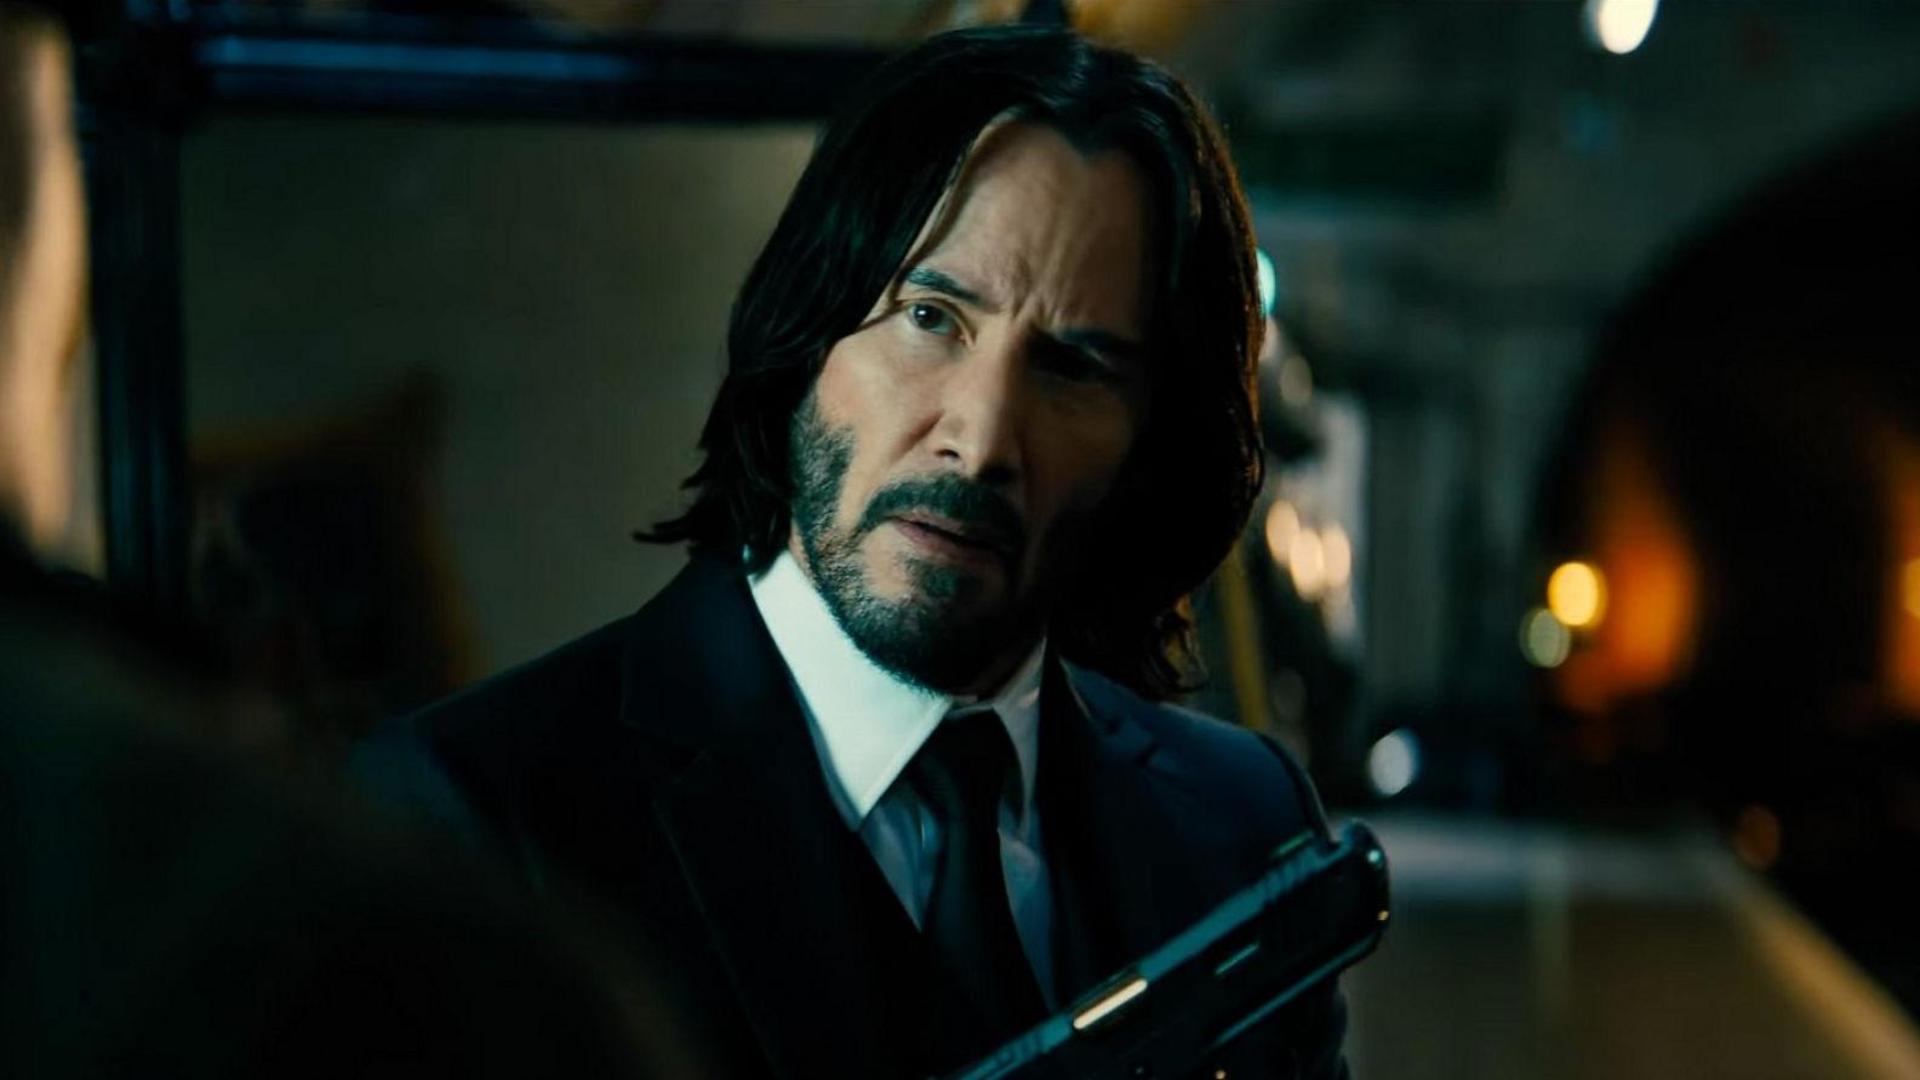 Box office: 'John Wick 4's here to stay and slay